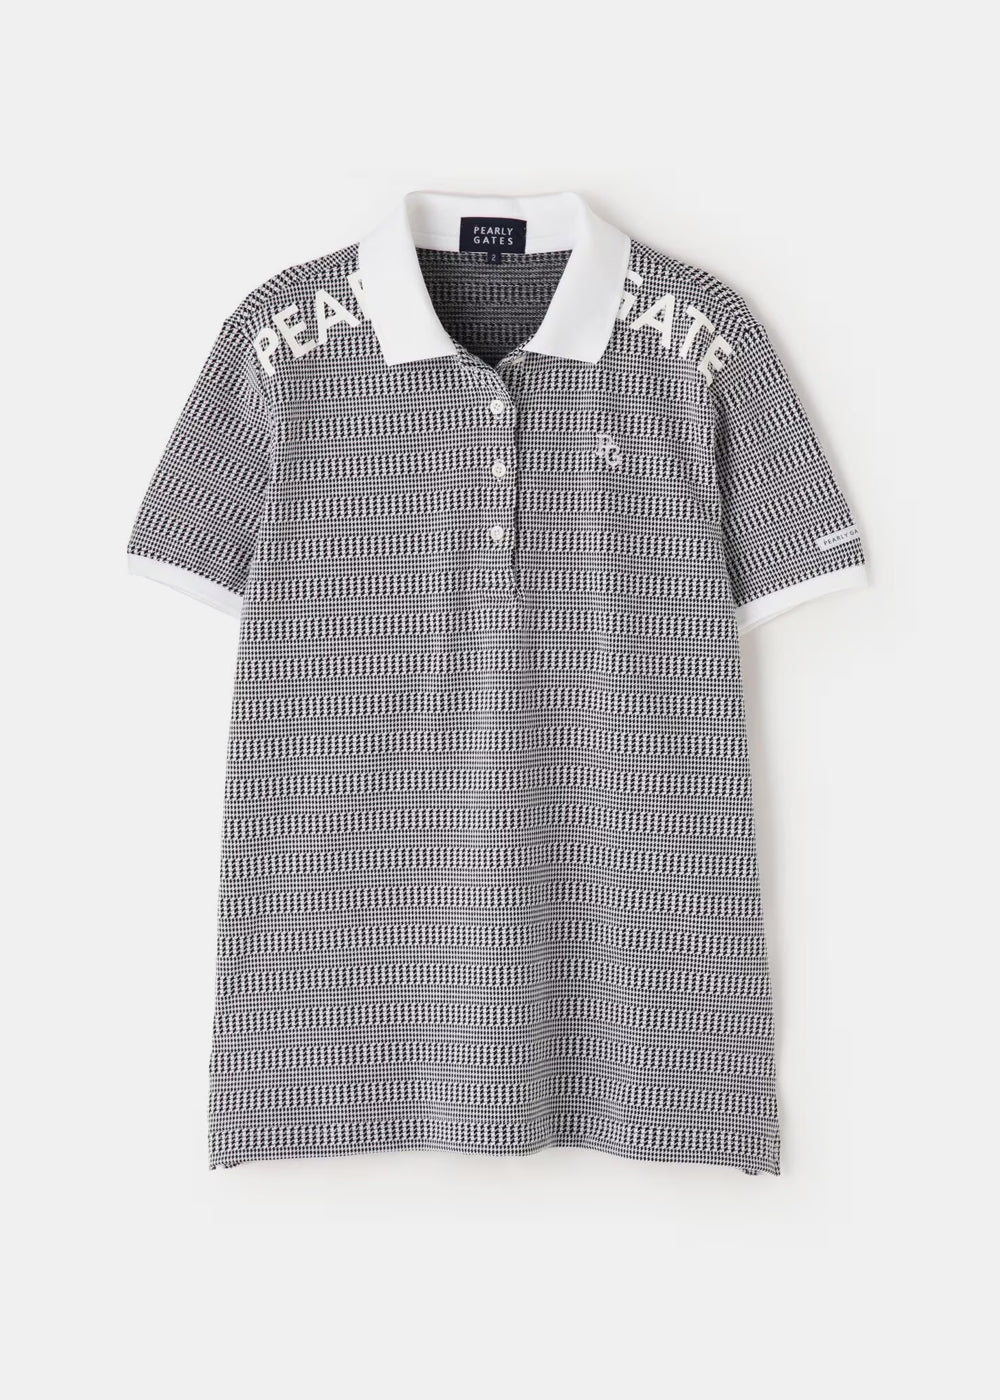 Pearly Gates White Short Sleeve Polo Shirt In Gray